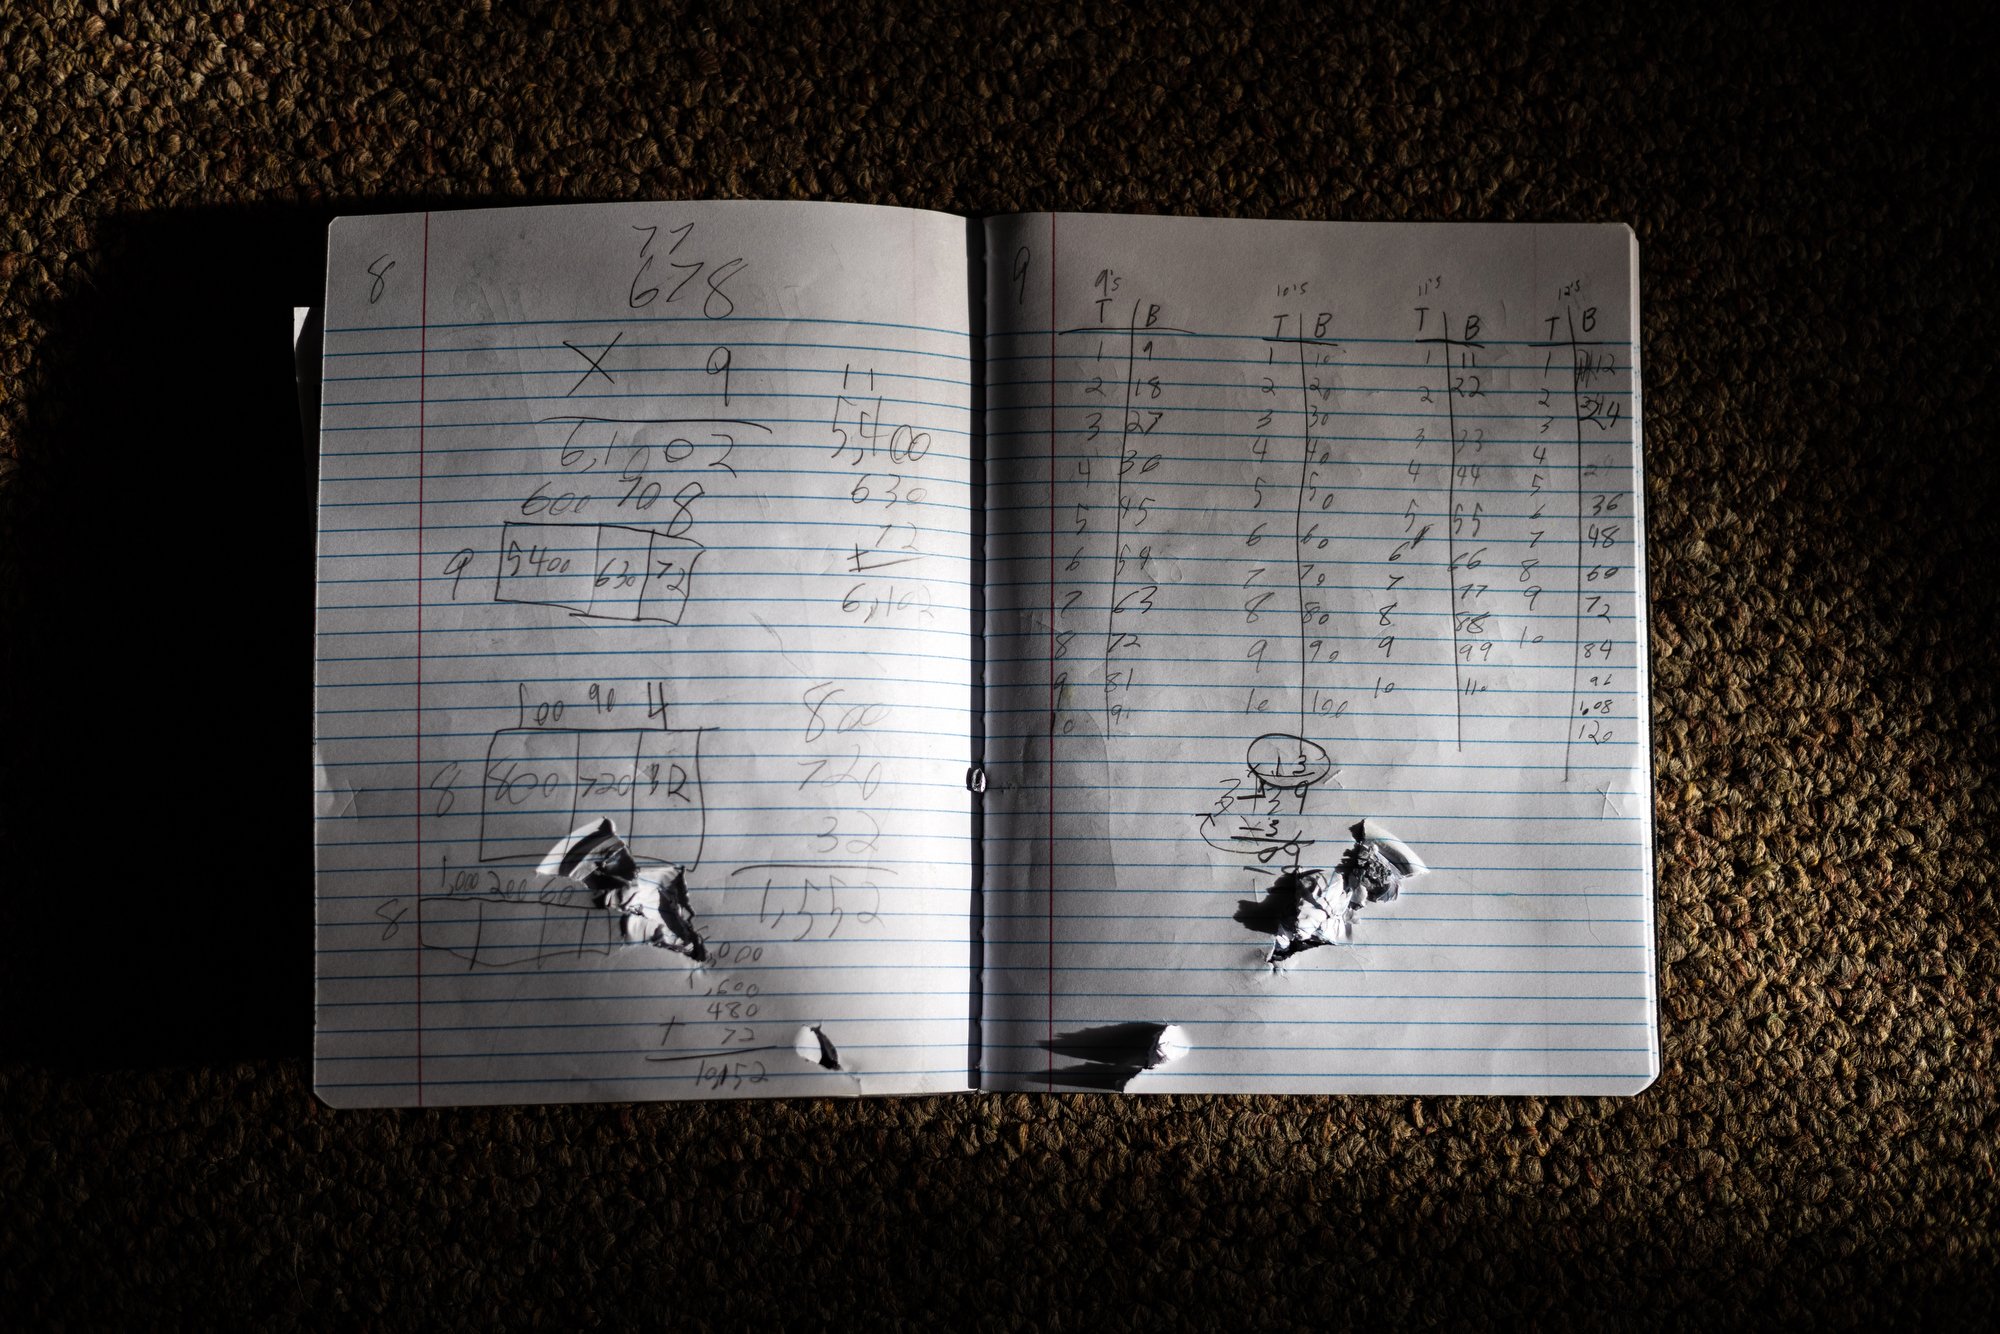  10-year-old Uziyah Garcia’s math notebook, was struck by a bullet during the mass shooting at Robb Elementary School. Uvalde, Texas, June 1, 2022. Uziyah was among 19 children and two teachers killed. 